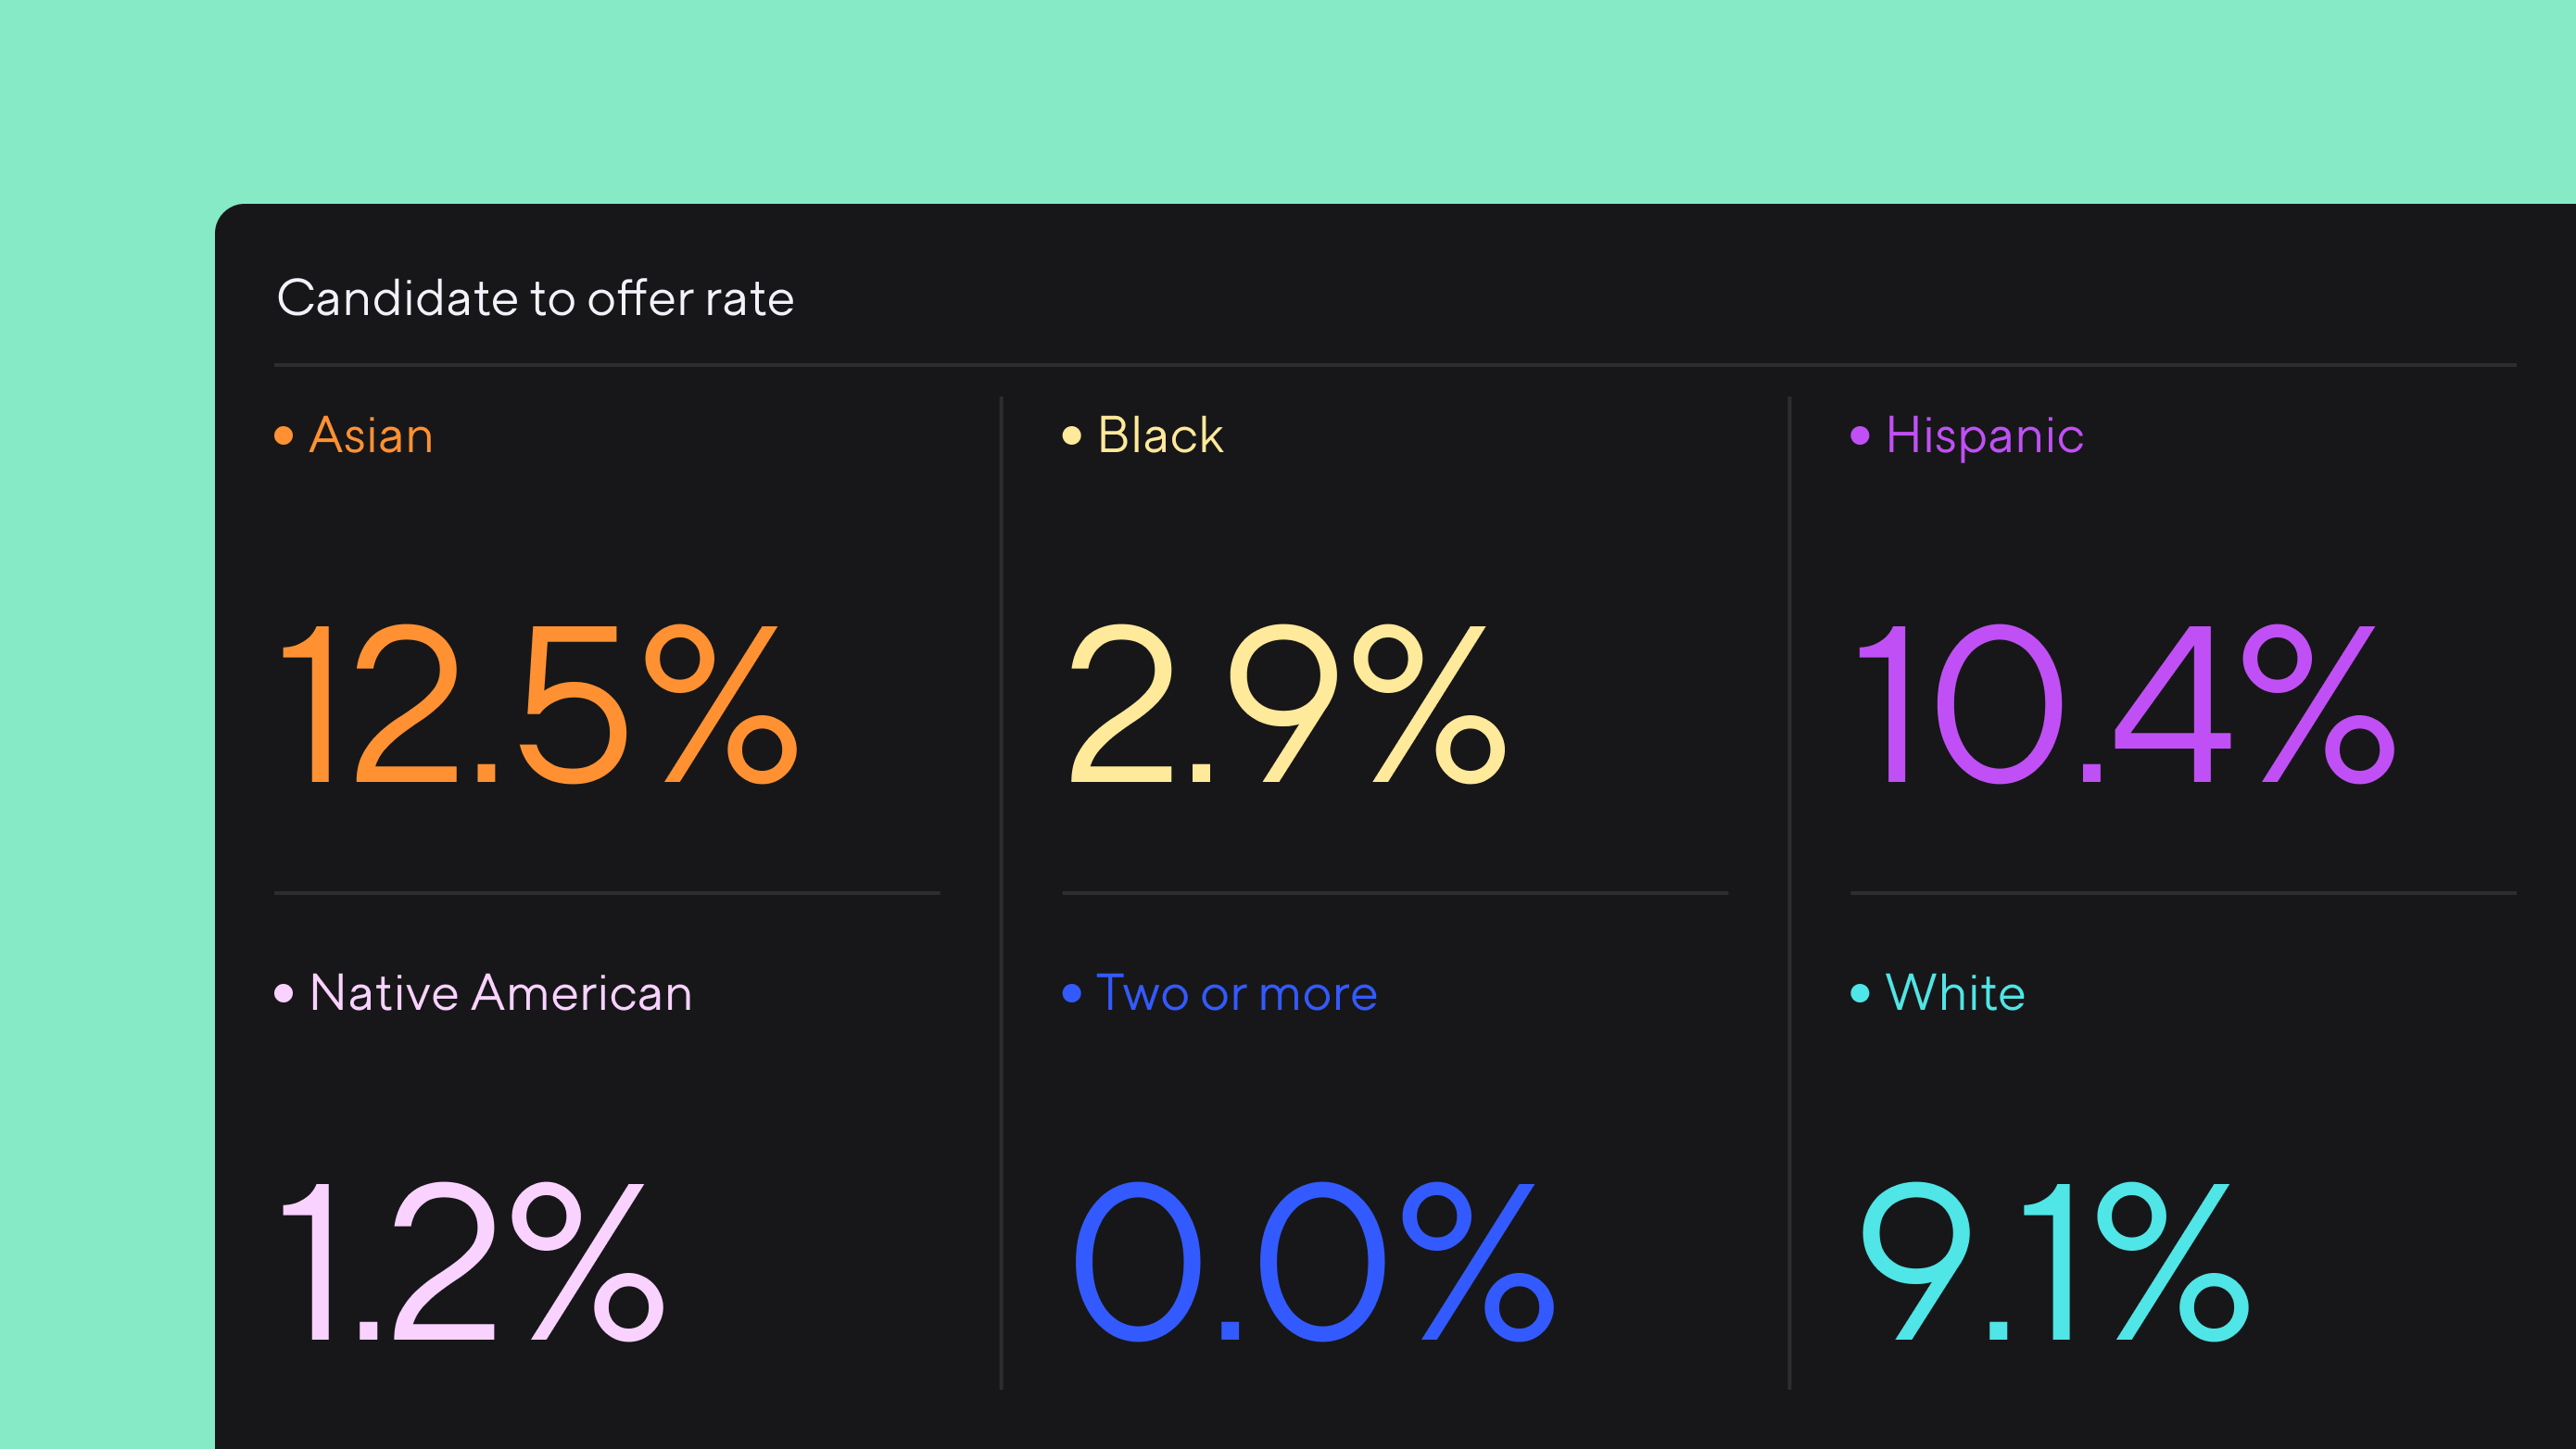 Dashboard titled Candidate to offer rate. Asian is 12.5%, Black is 2.9%, Hispanic is 10.4%, Native American is 1.2%, two or more is 0.0%, and White is 9.1%.